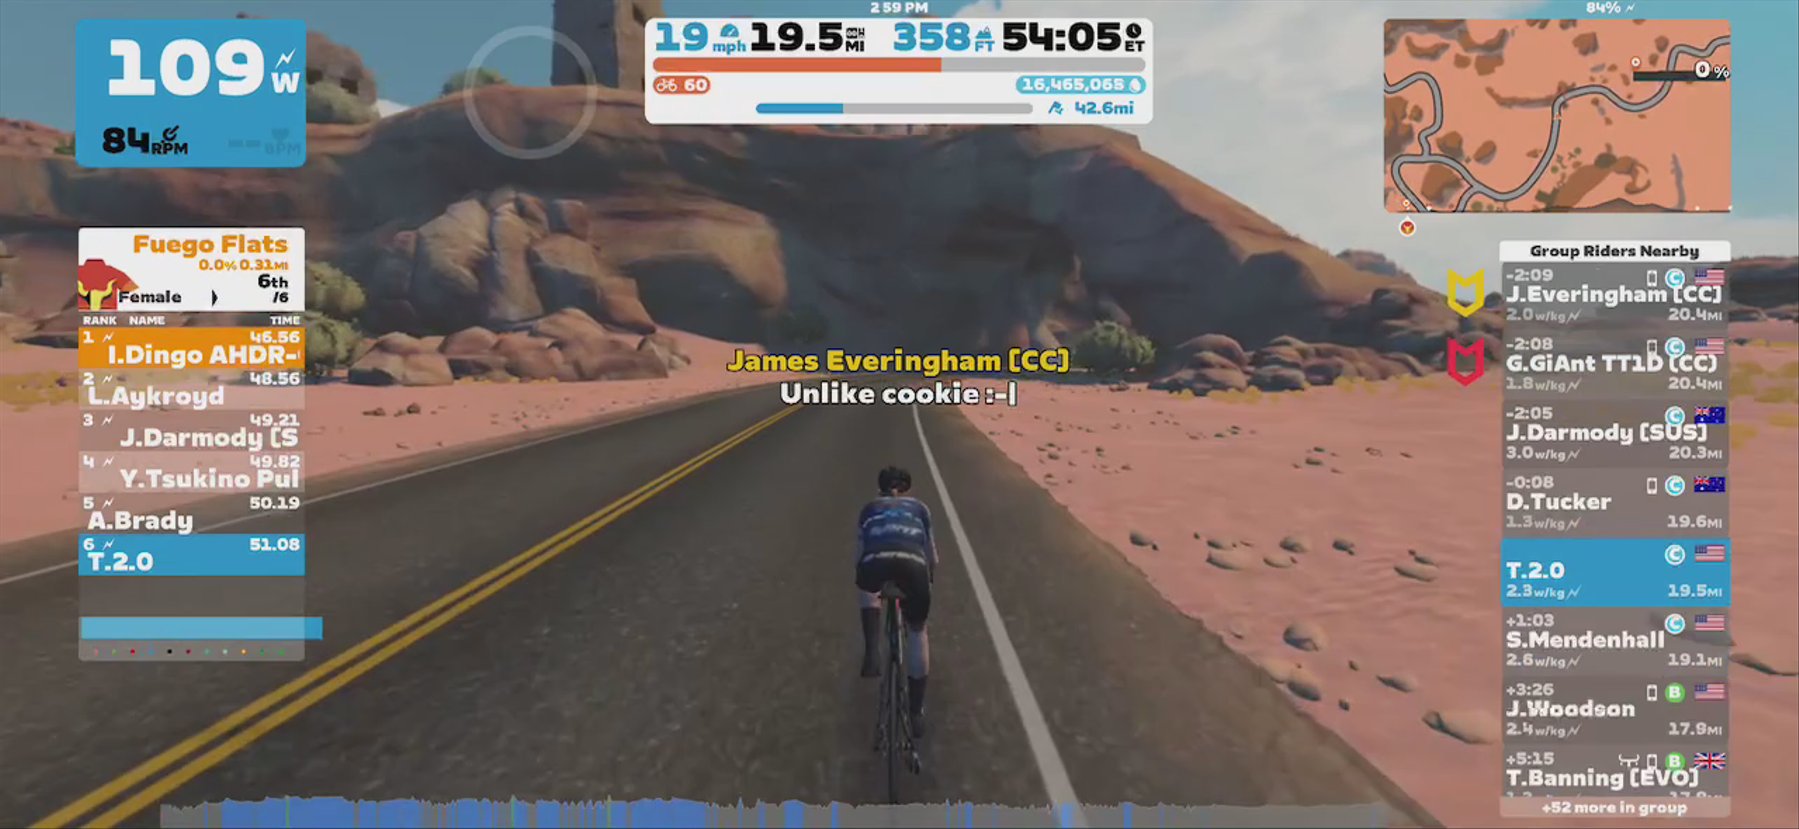 Zwift - Group Ride: AHDR Breakfast with the Pscyclepaths (C) on Big Flat 8 in Watopia